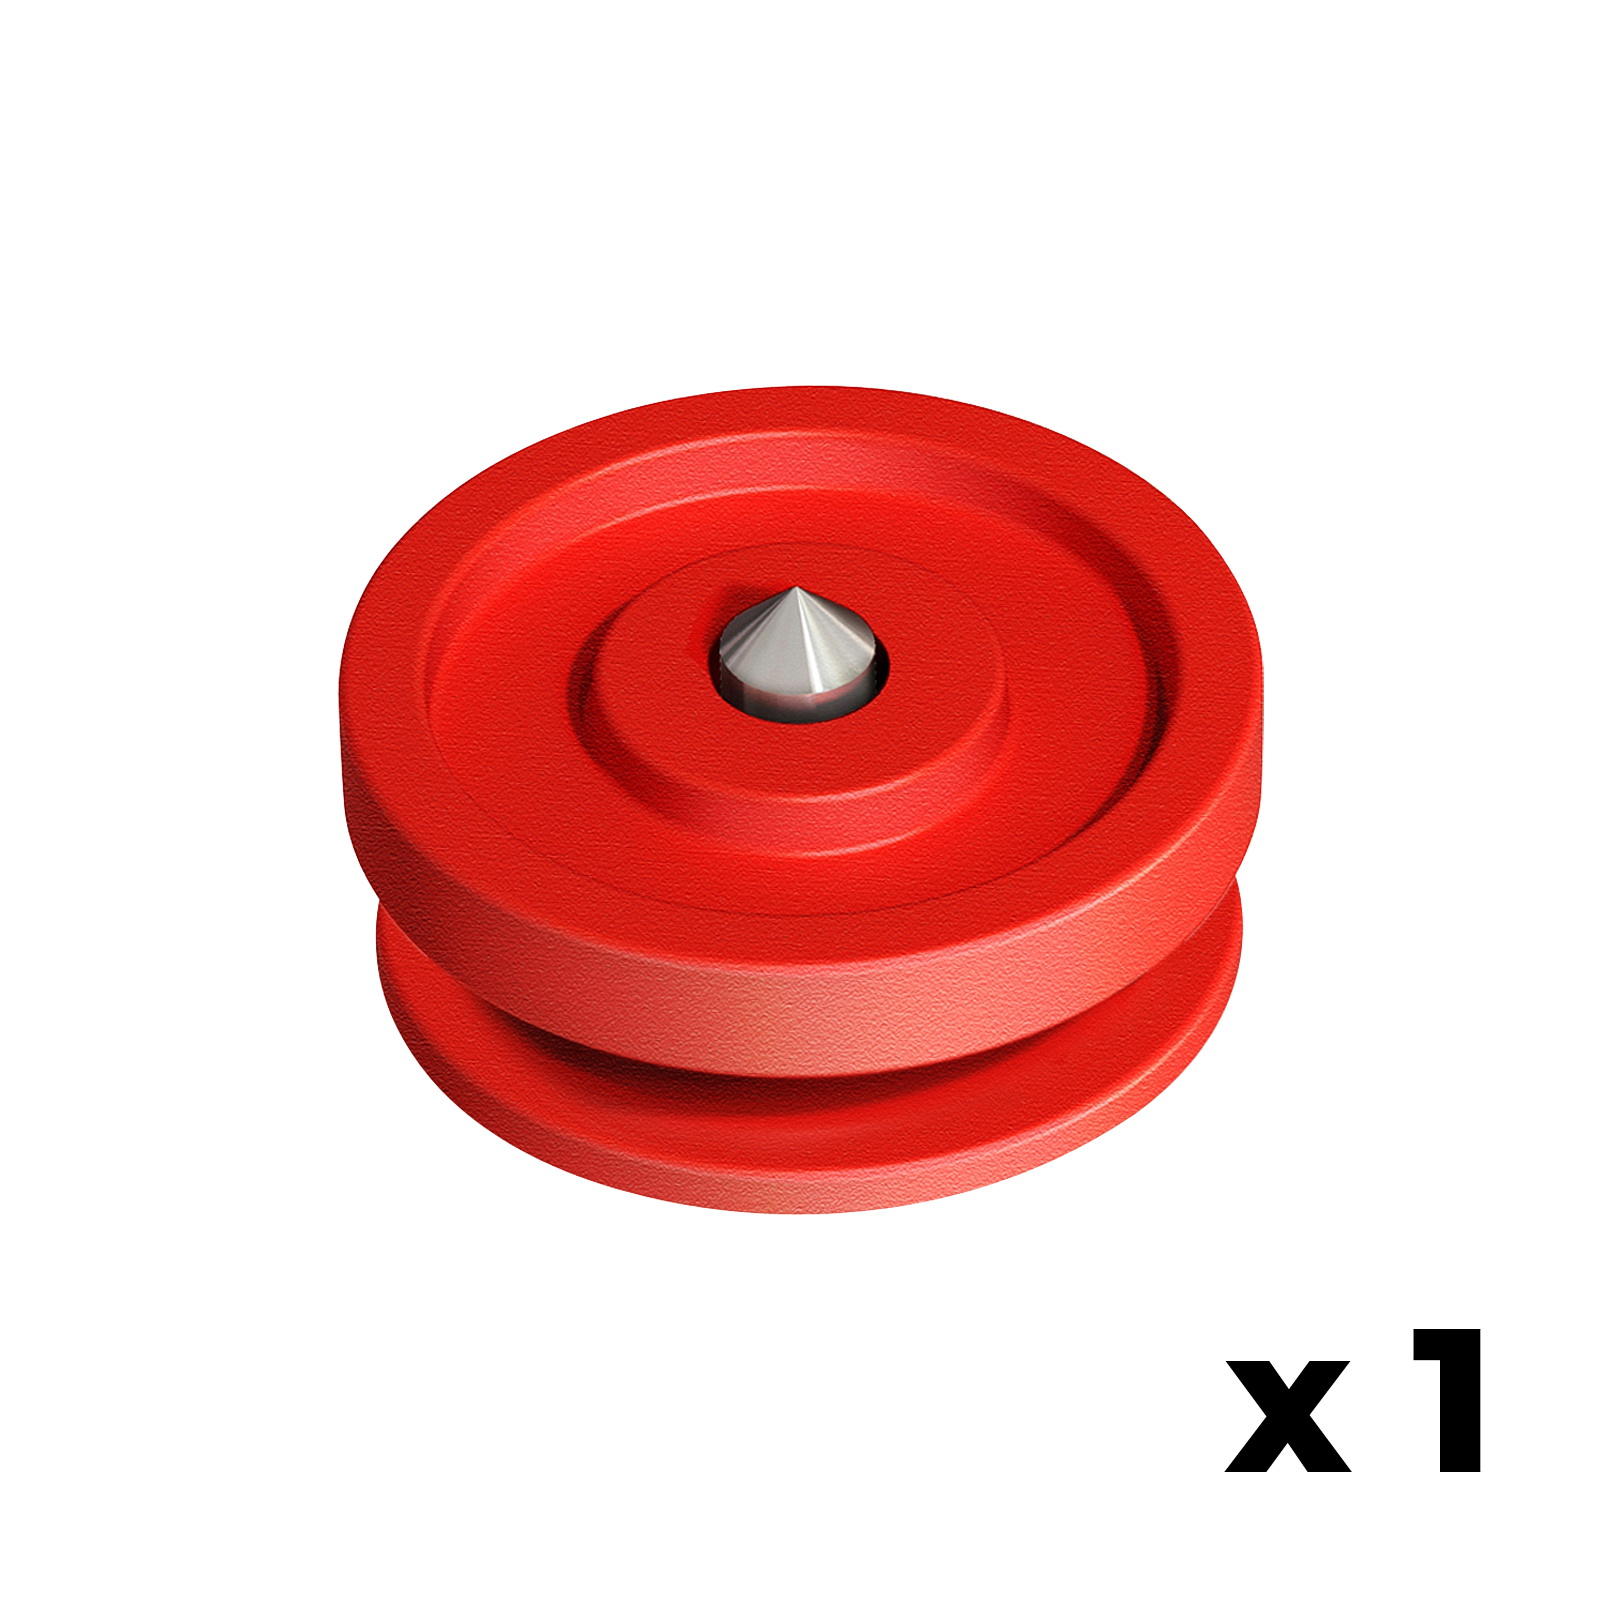 Button marker tool 